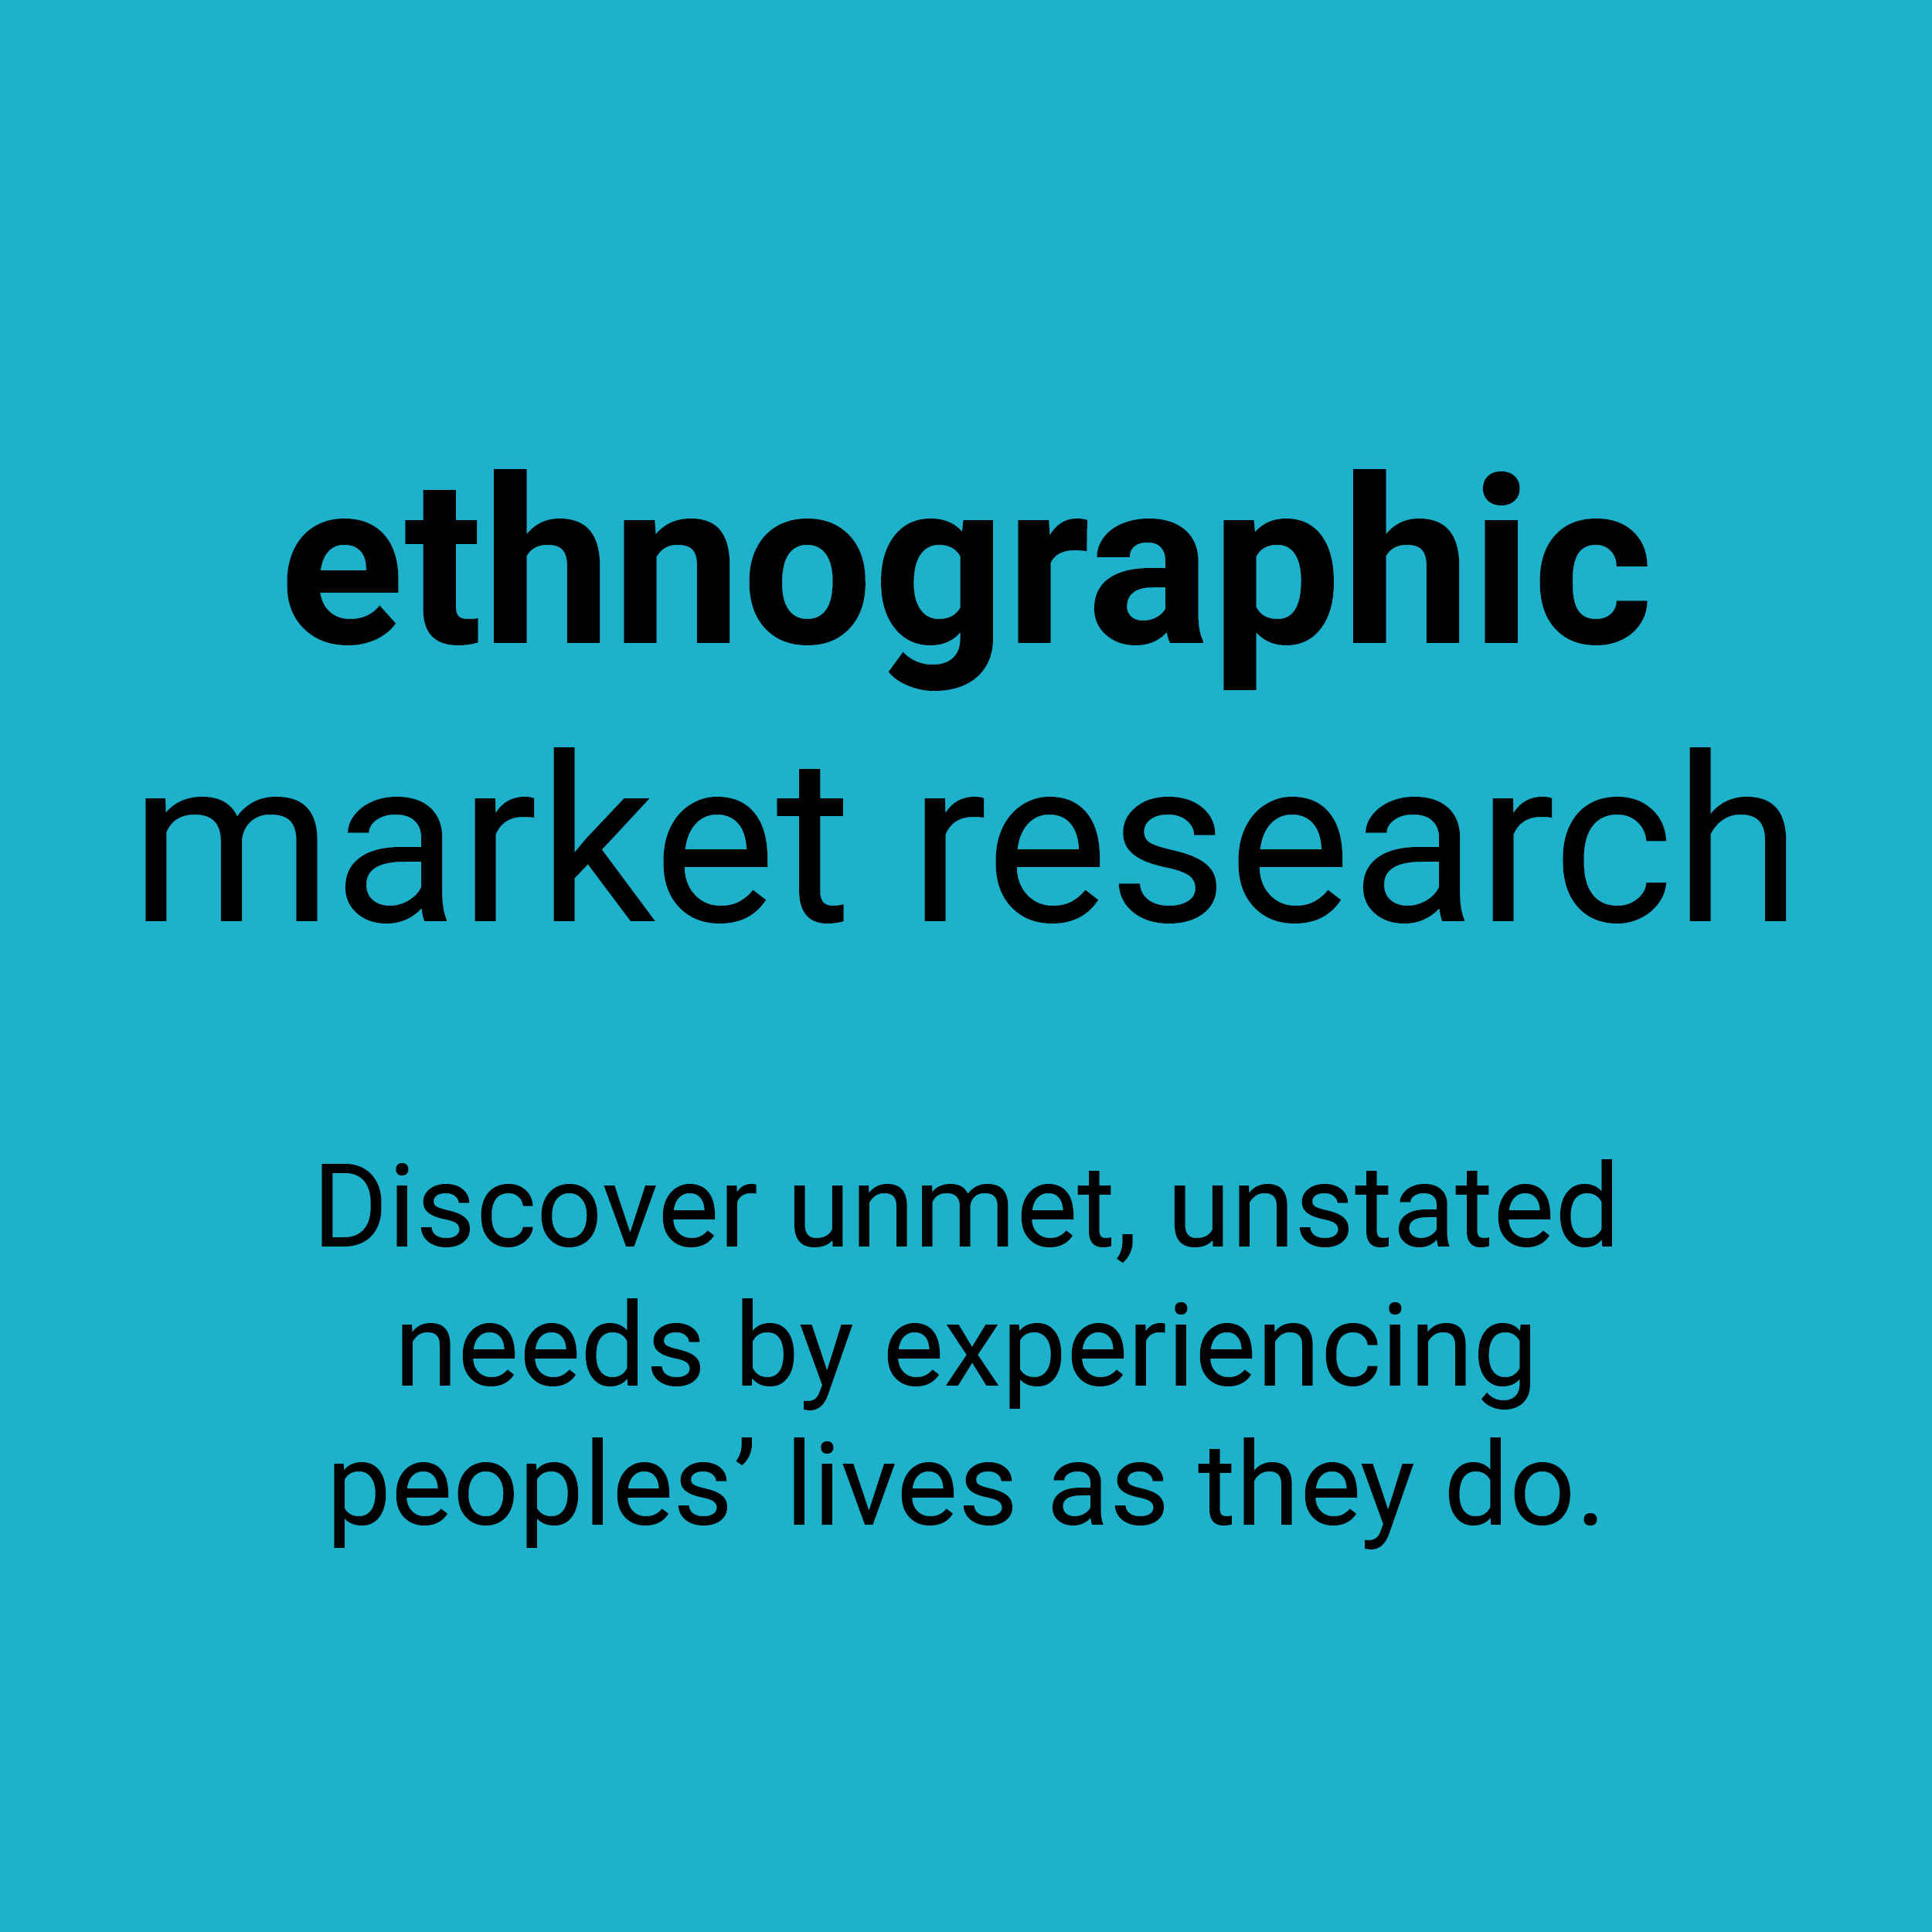 Ethnographic market research. Discover unmet, unstated needs by experiencing peoples' lives as they do.